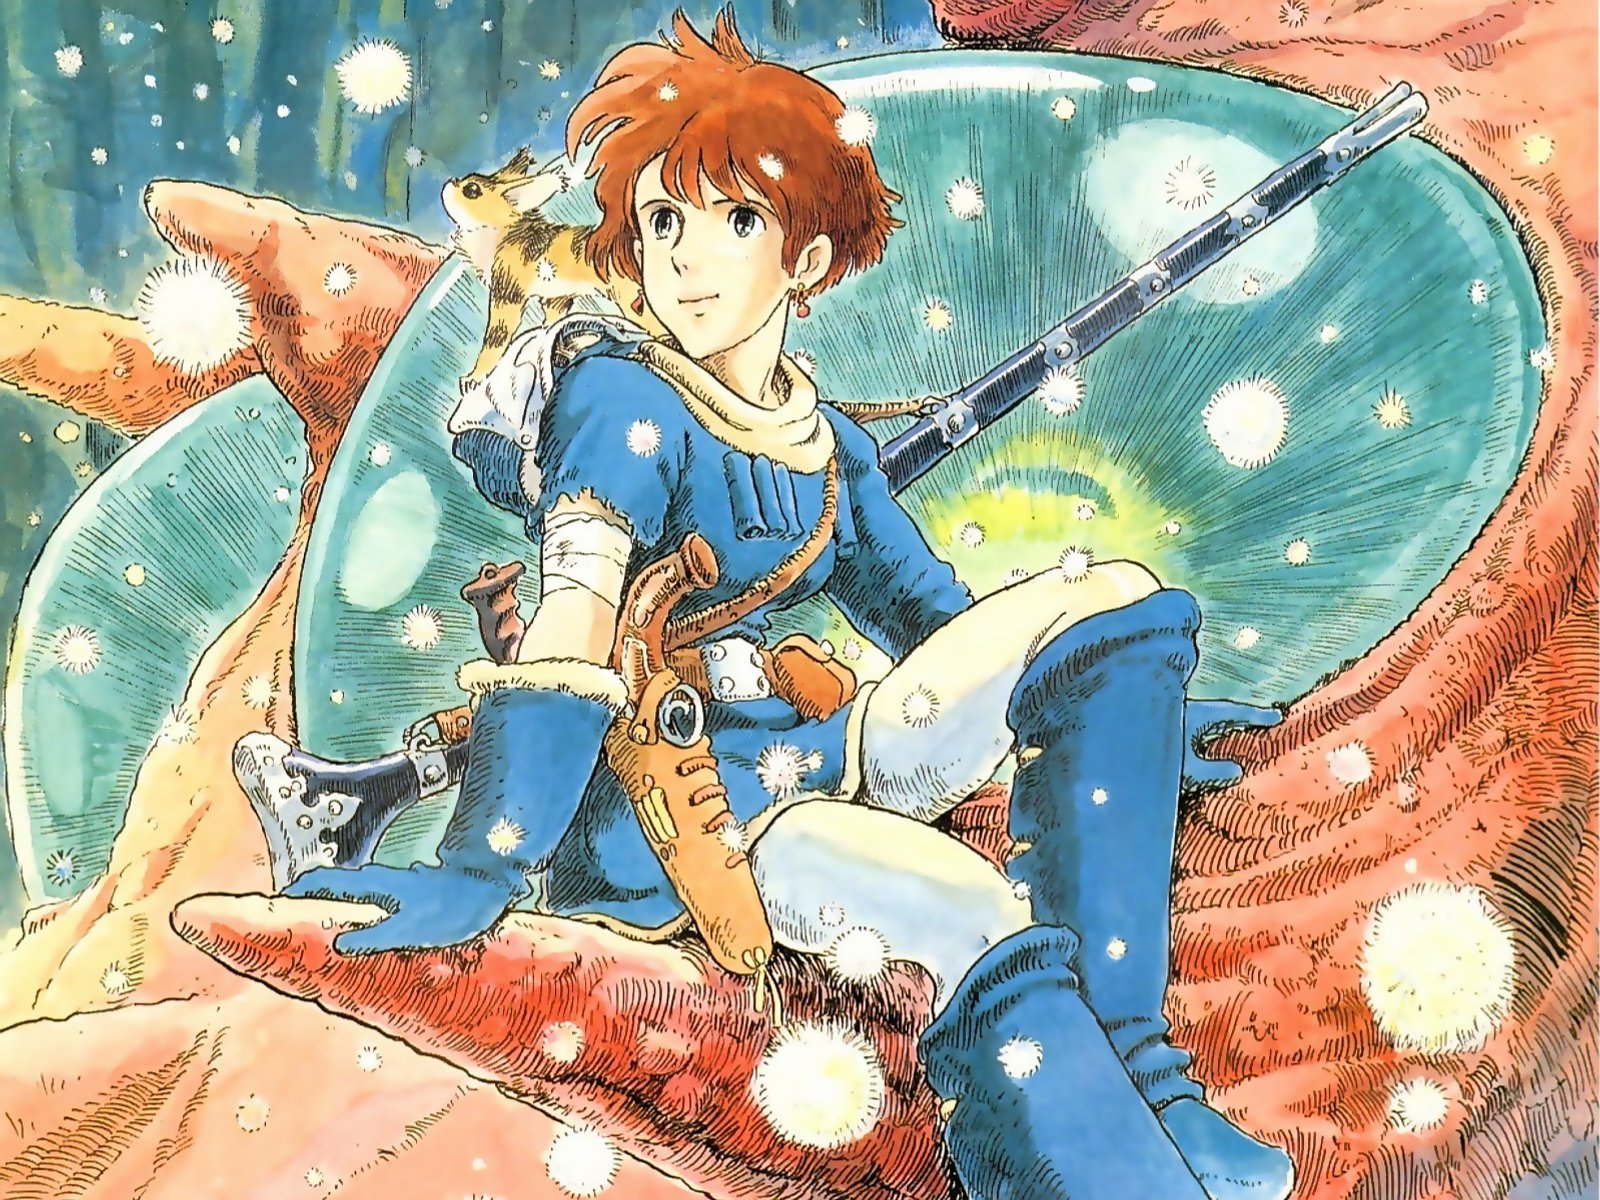 Anime Nausicaä Of The Valley Of The Wind Wallpaper